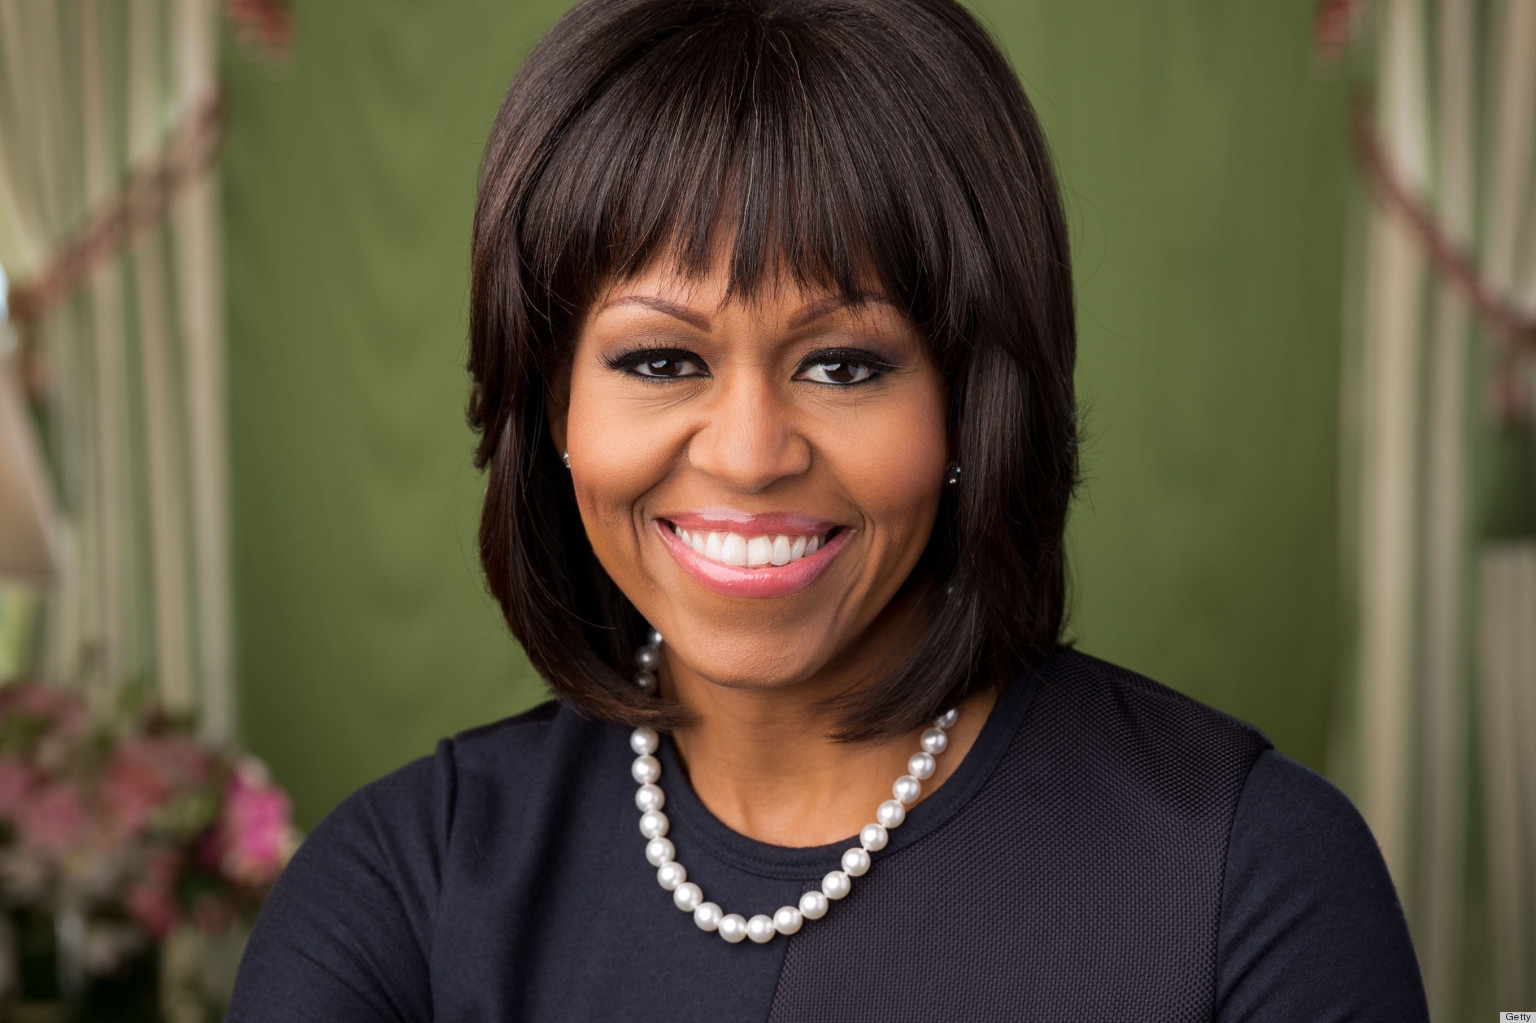 The 10 Blackest Things Michelle Obama Has Ever Done